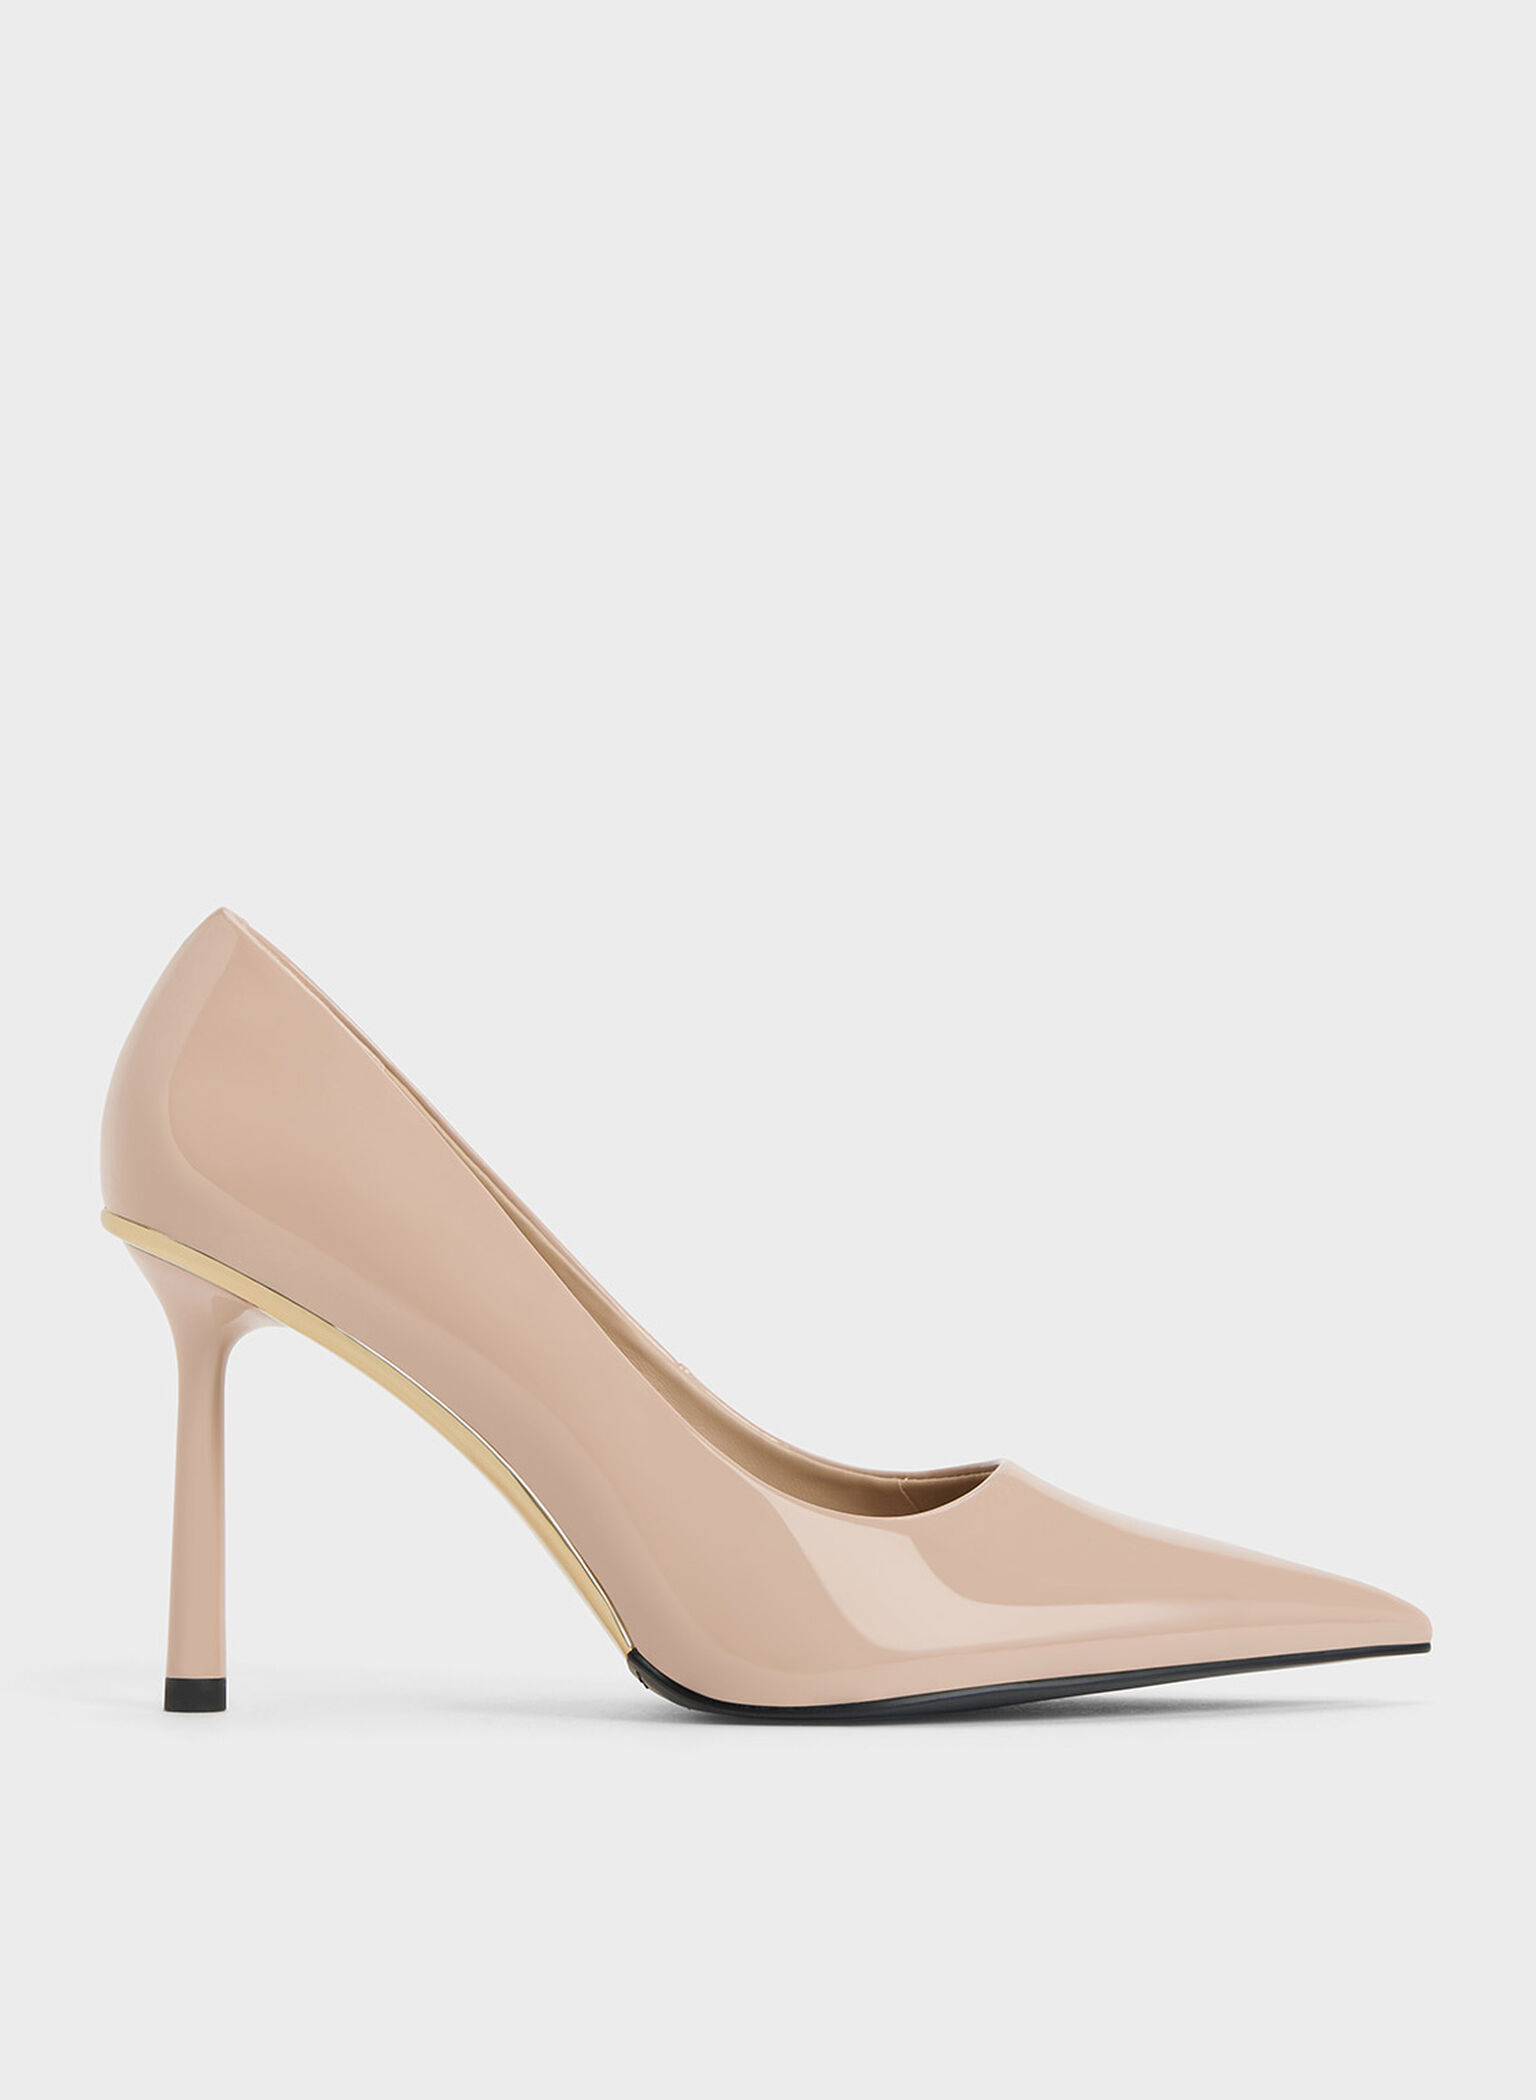 Nude Patent Pointed-Toe Stiletto Heels - CHARLES & KEITH MY